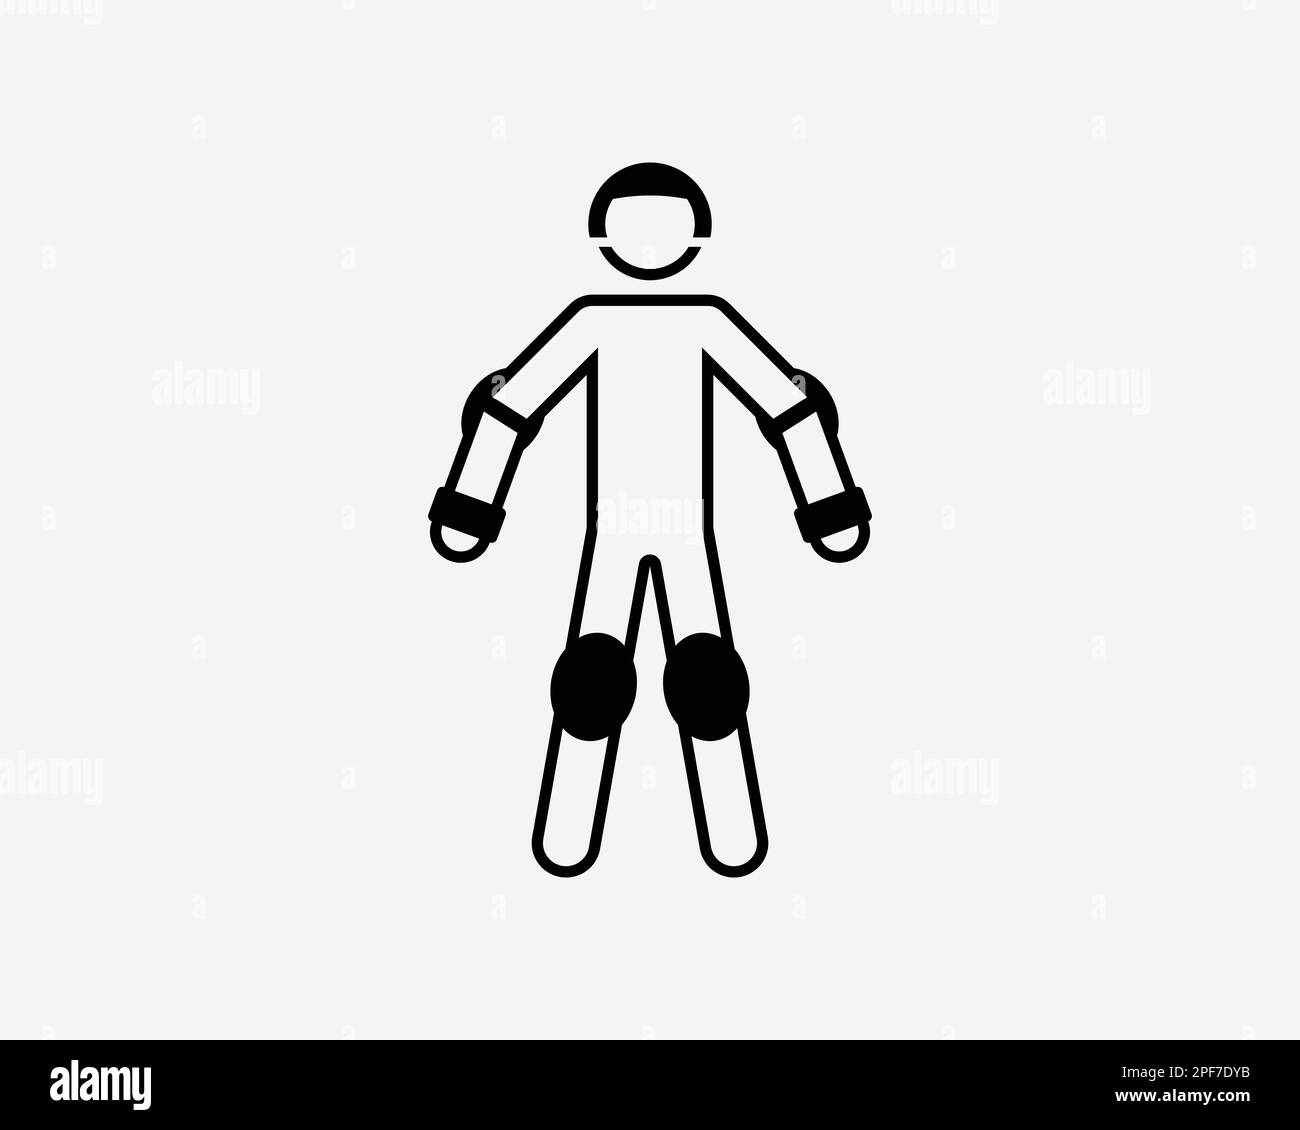 Skating Safety Equipment Protective Padding Pad Helmet Black White Silhouette Symbol Icon Sign Graphic Clipart Artwork Illustration Pictogram Vector Stock Vector